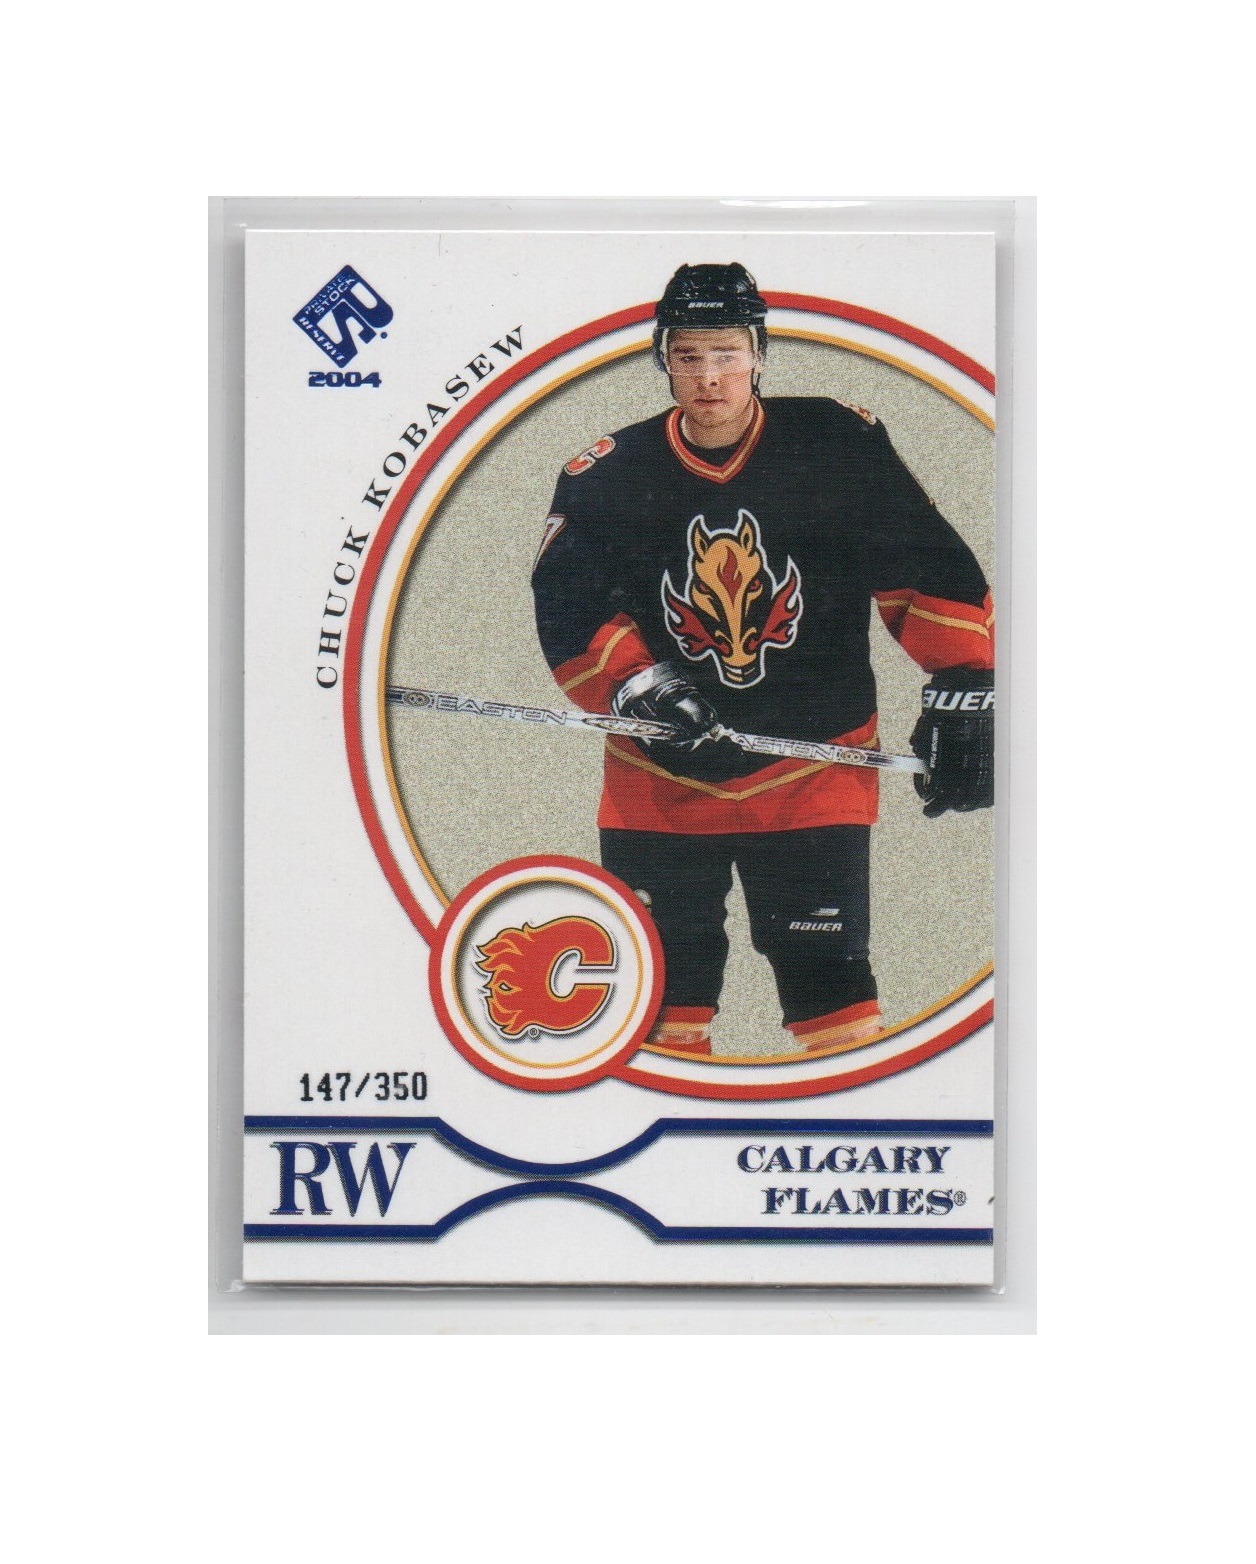 2003-04 Private Stock Reserve Blue #16 Chuck Kobasew (12-X202-FLAMES)